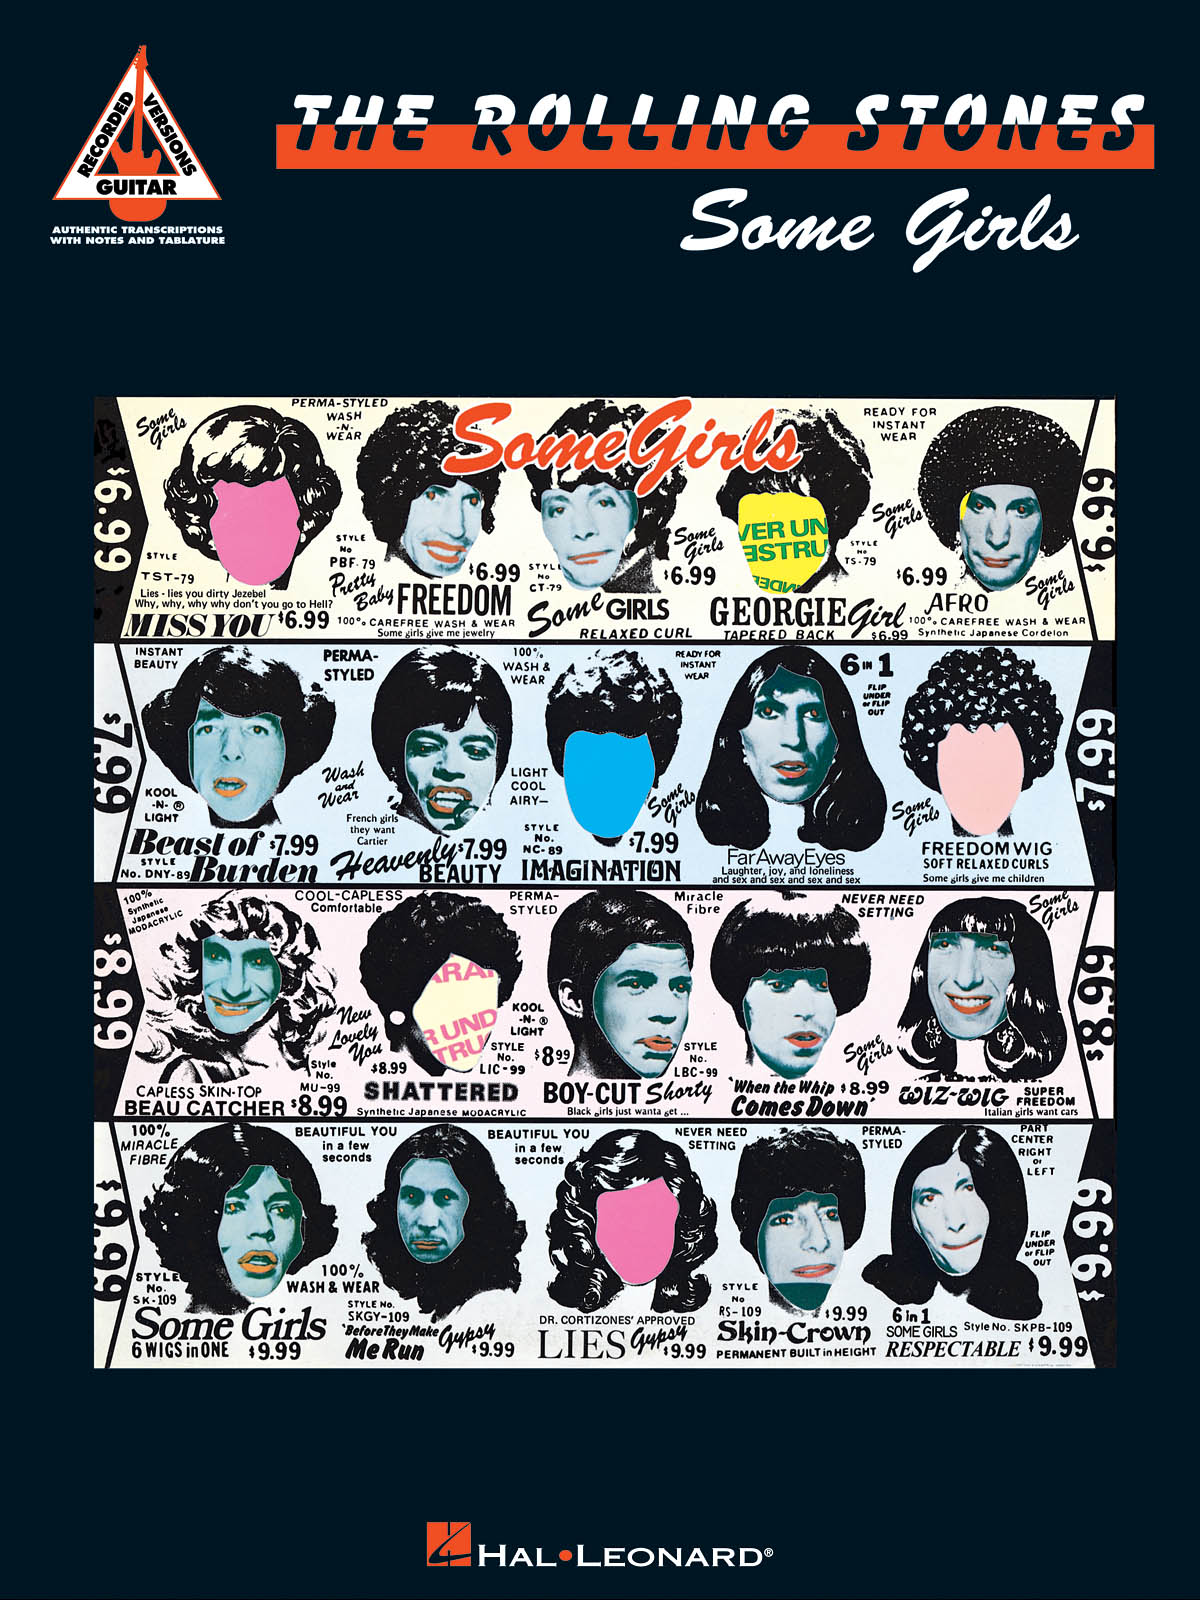 The Rolling Stones: Rolling Stones - Some Girls: Guitar Solo: Album Songbook